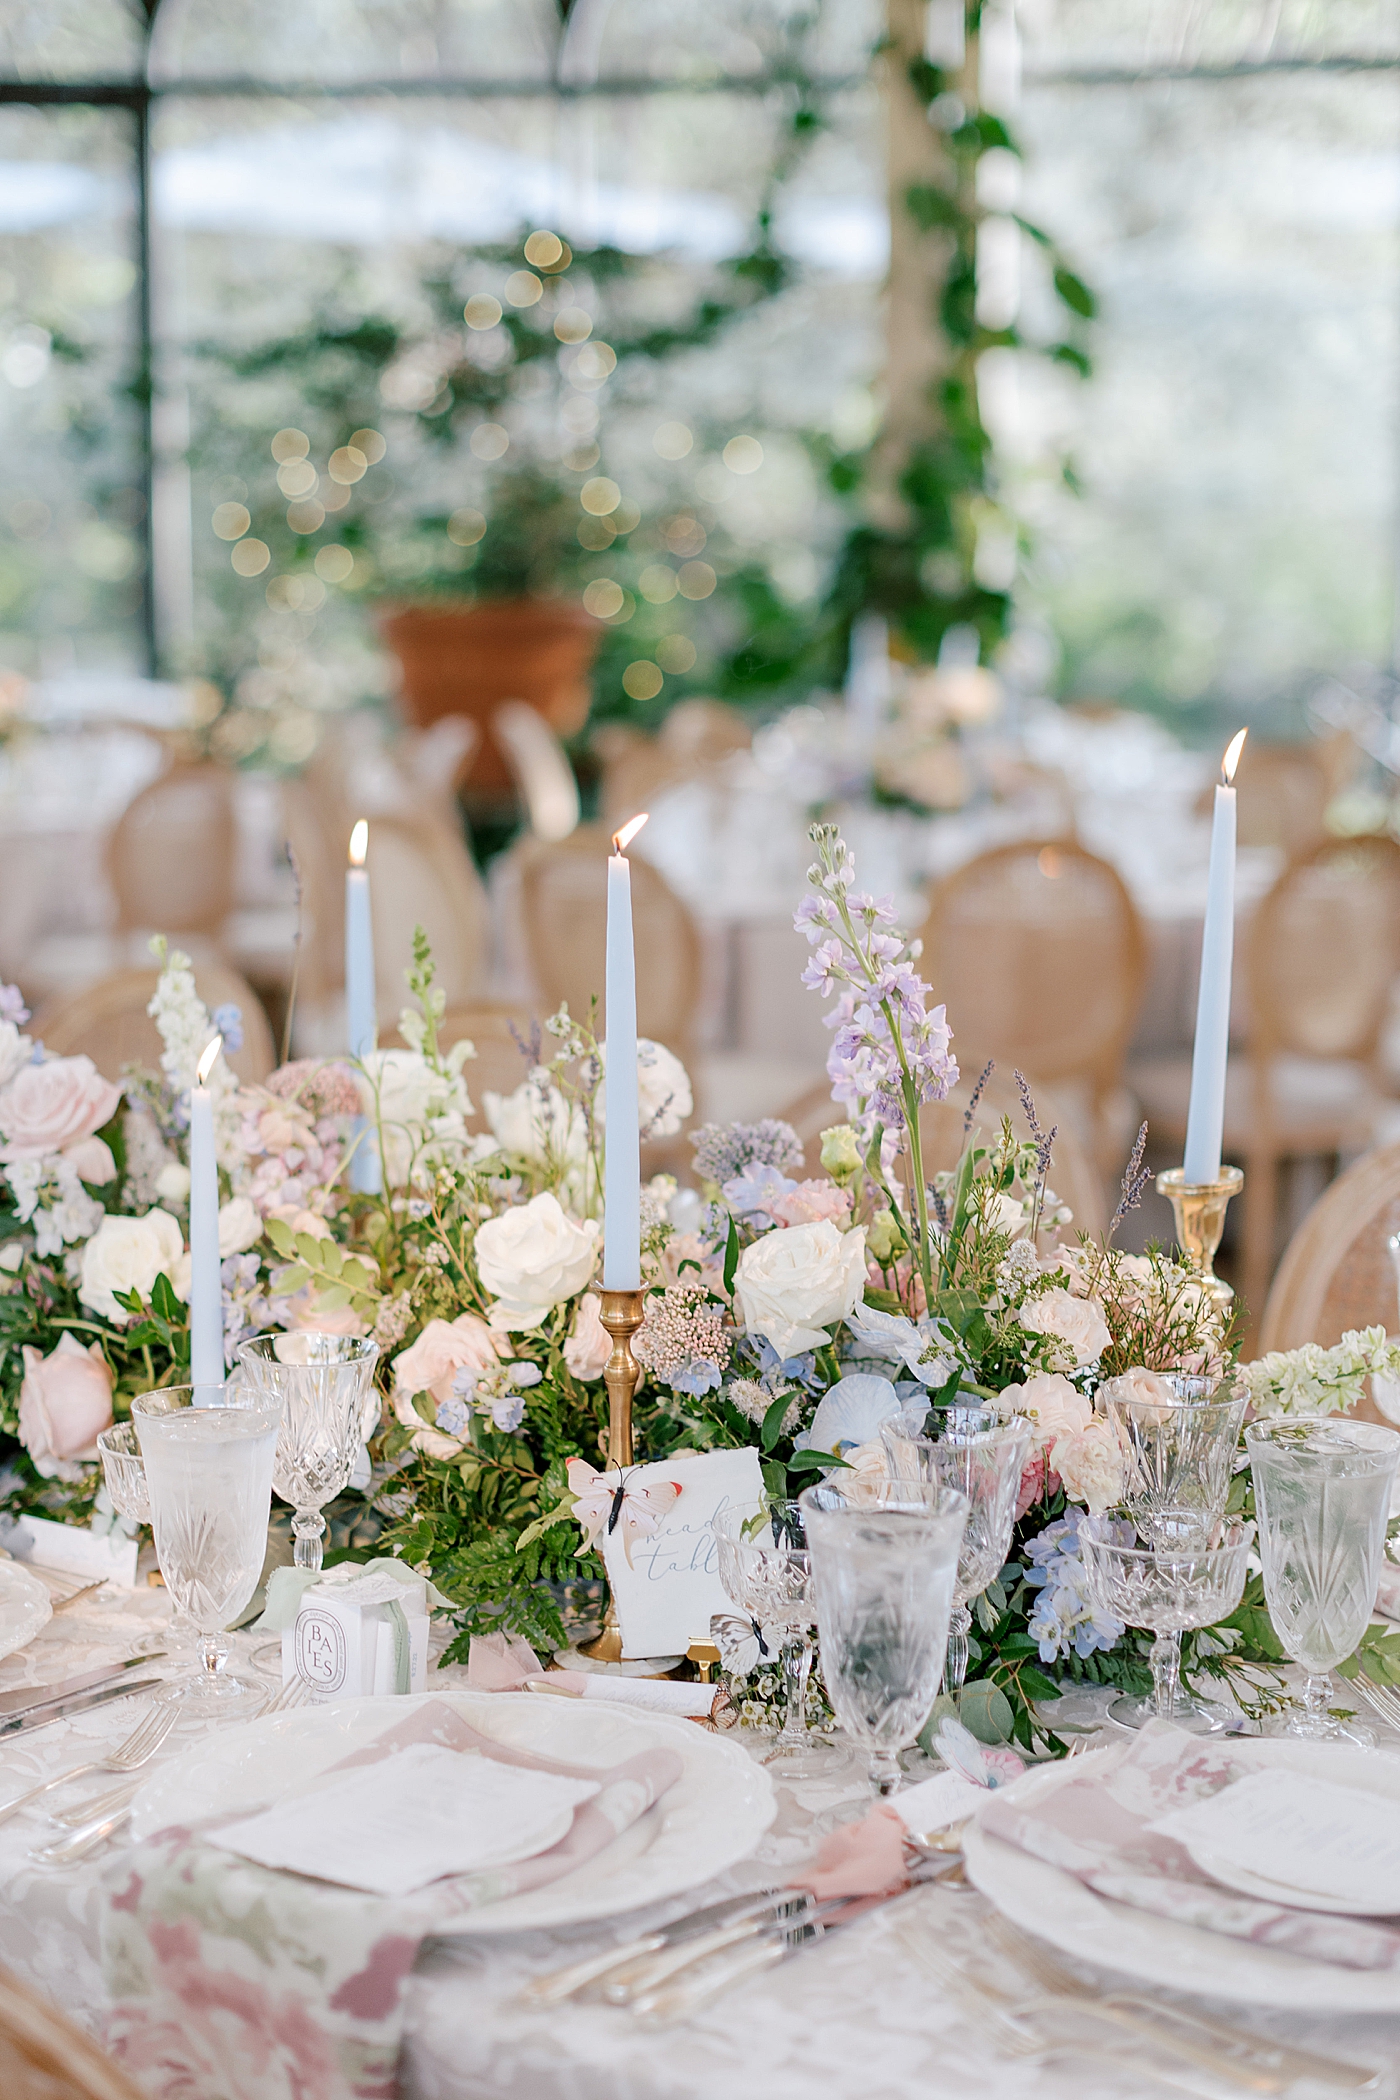 Reception table with tapered candles and florals | Image by Hope Helmuth Photography